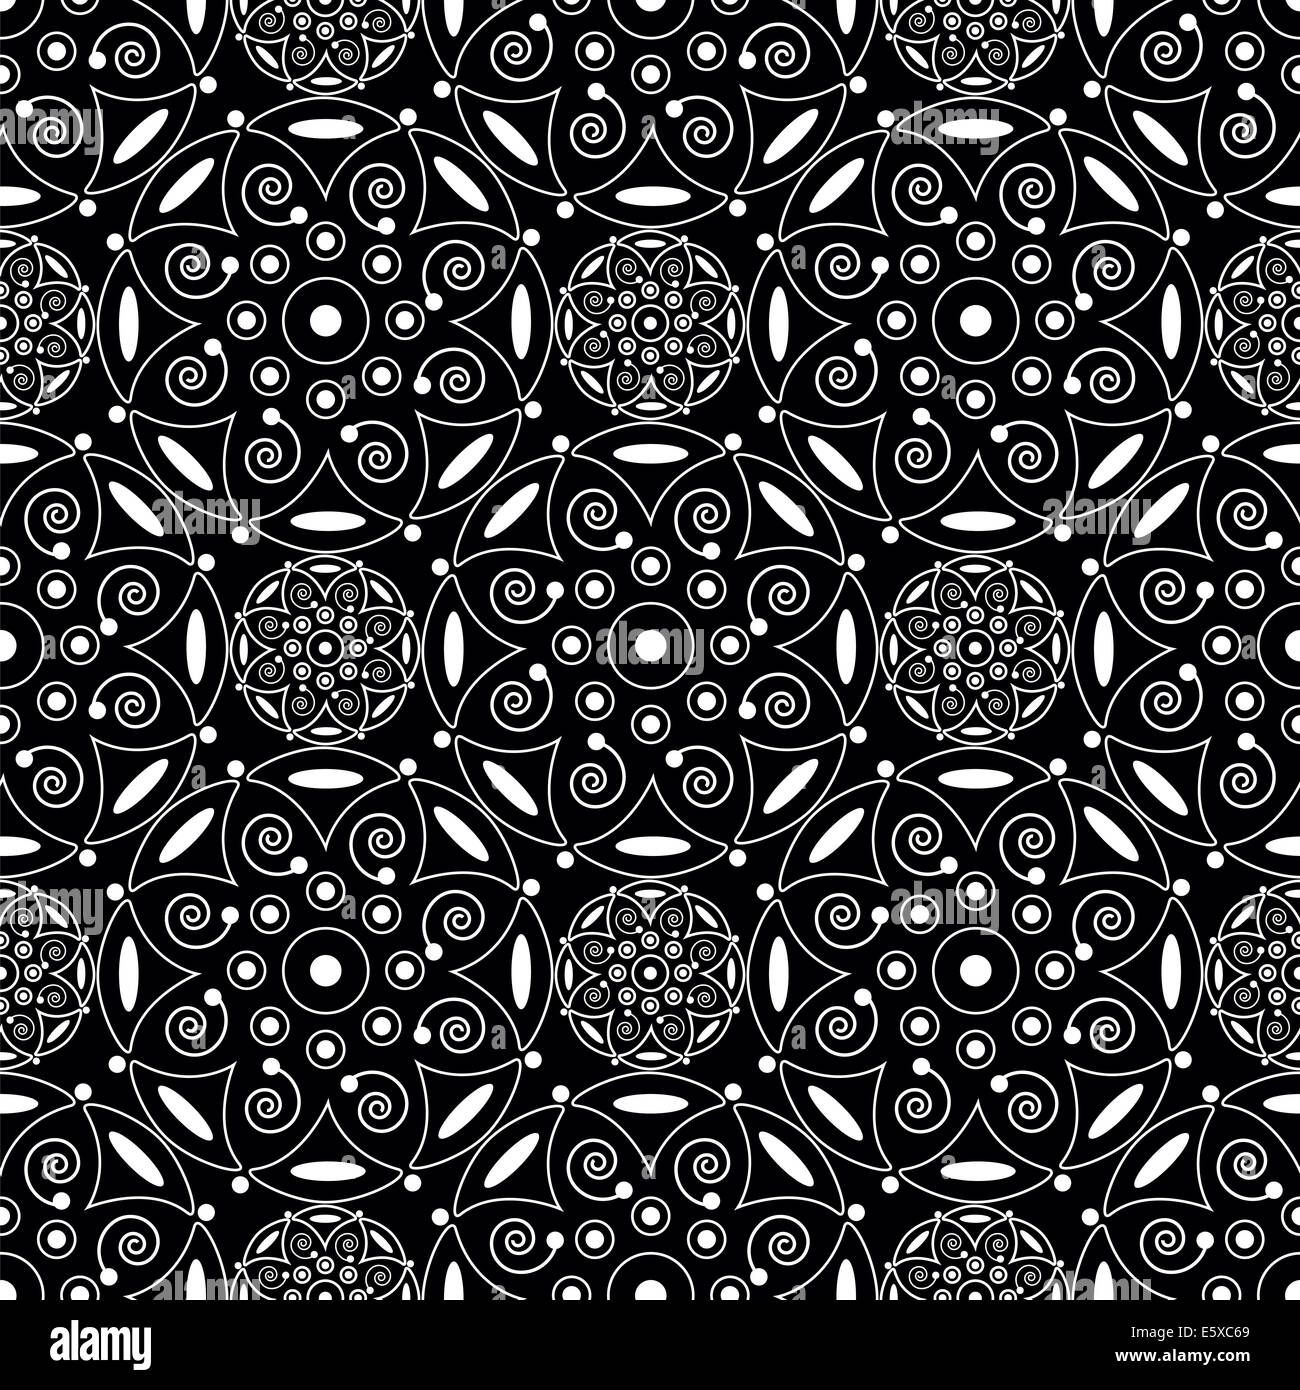 abstract white seamless pattern on black background Stock Photo